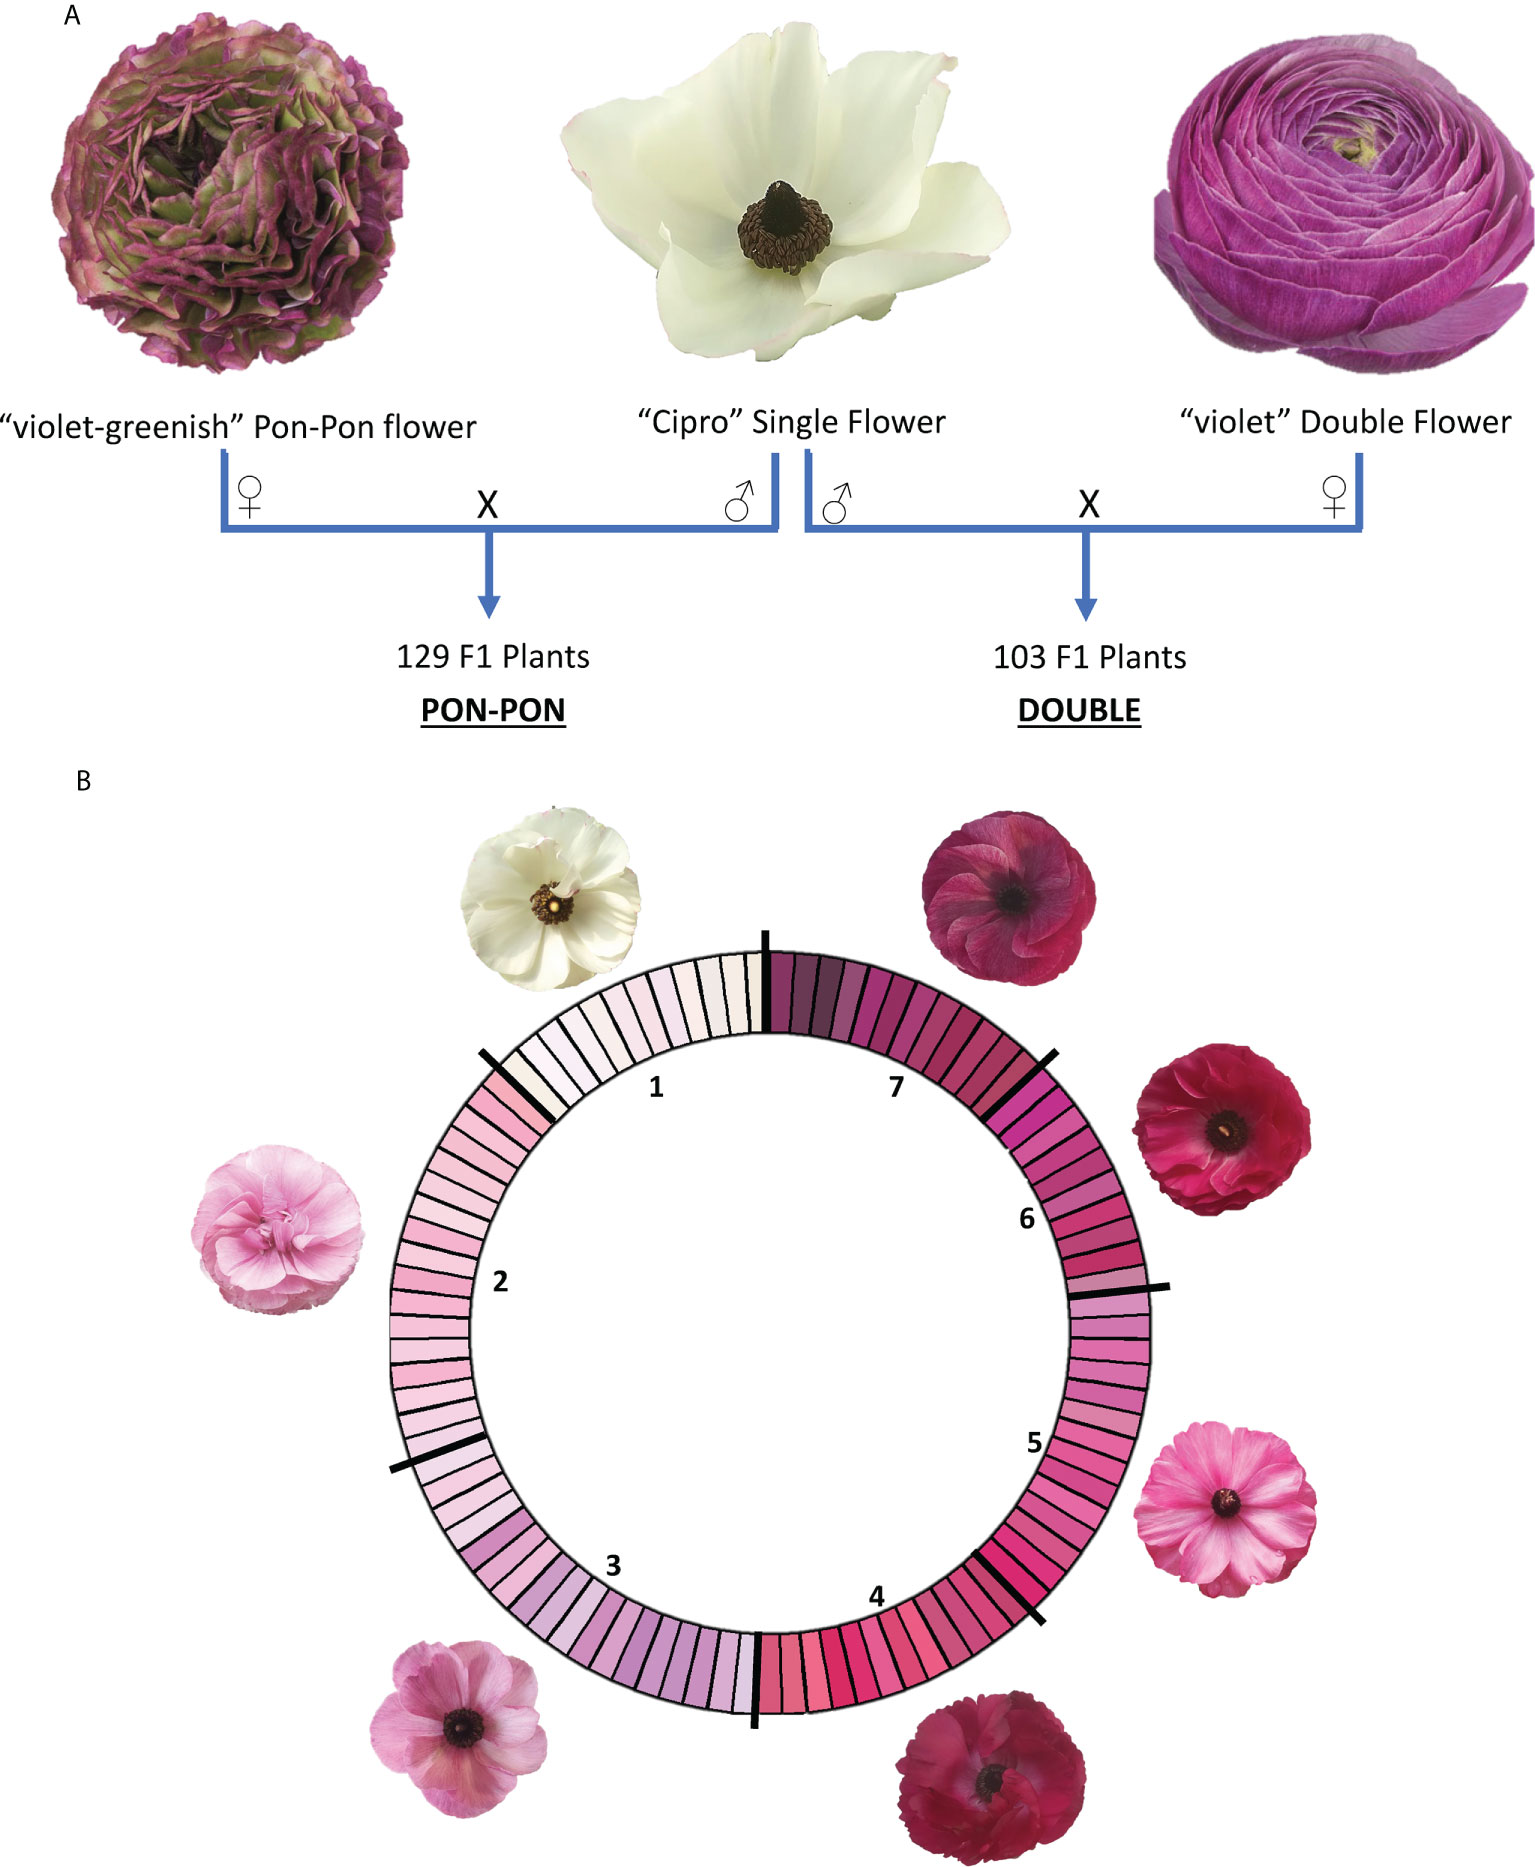 Frontiers First genetic maps development and QTL mining in Ranunculus asiaticus L image